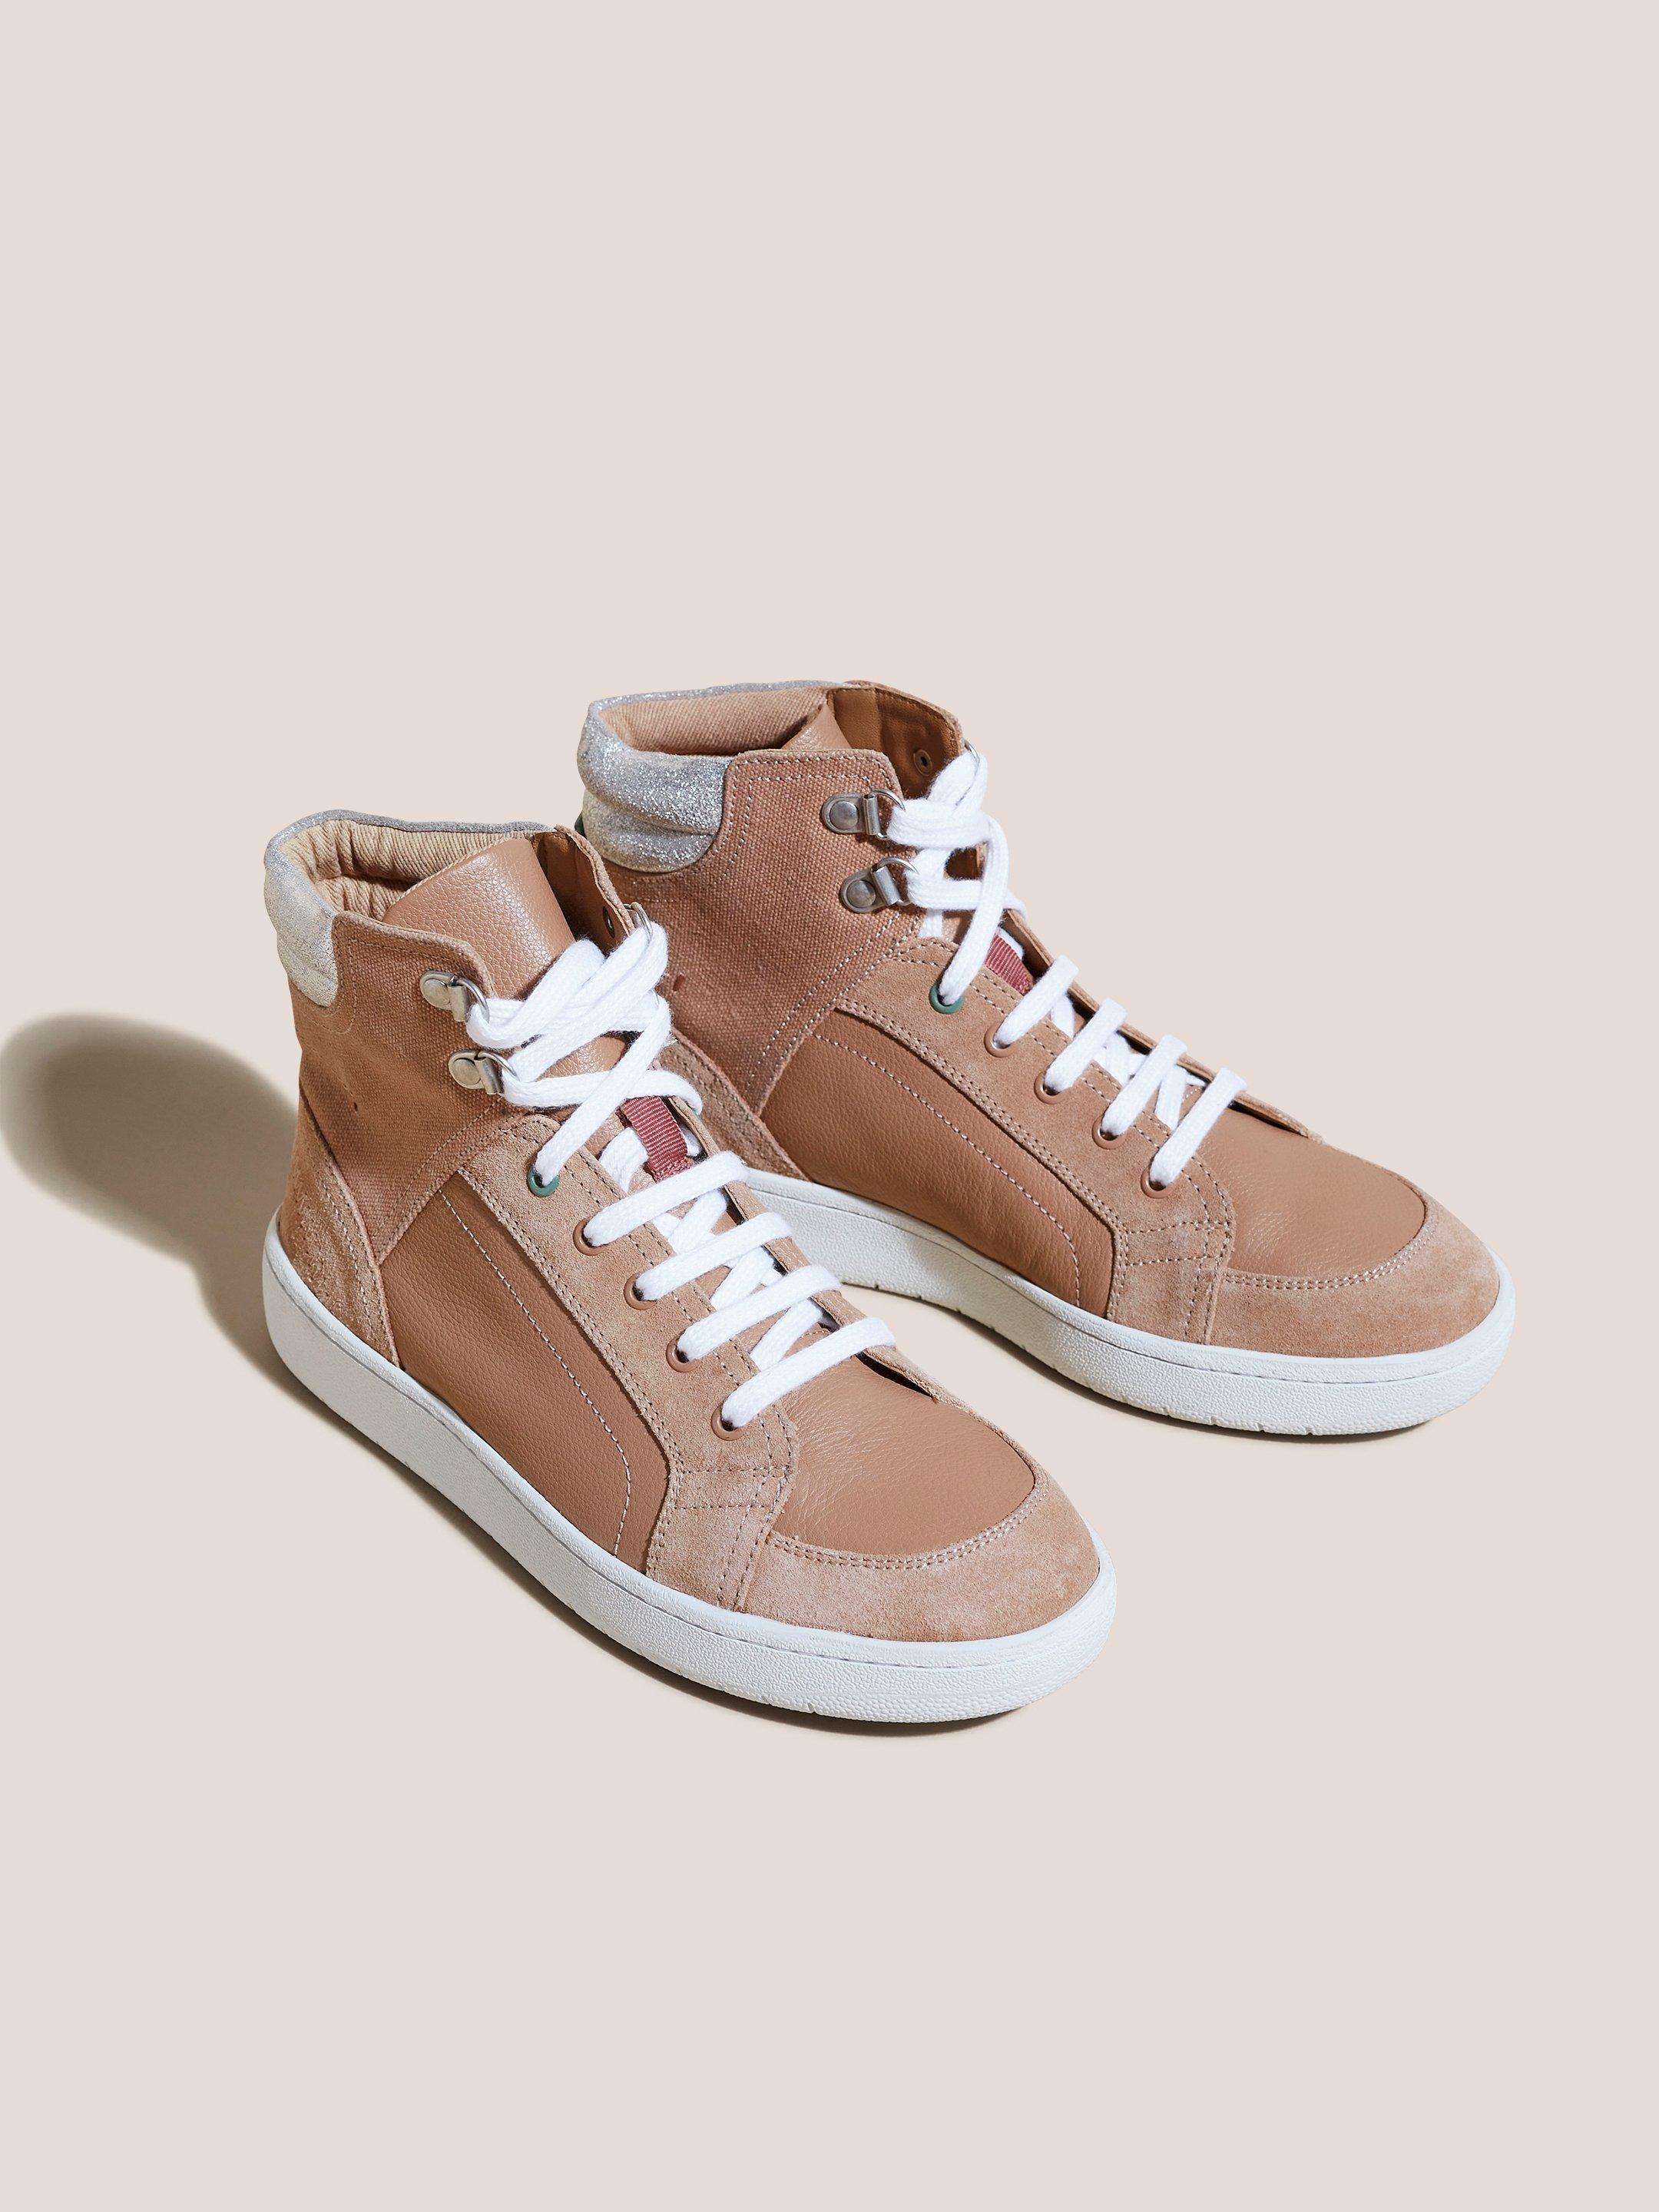 Leather Suede High Top Trainer in LGT PINK - FLAT FRONT